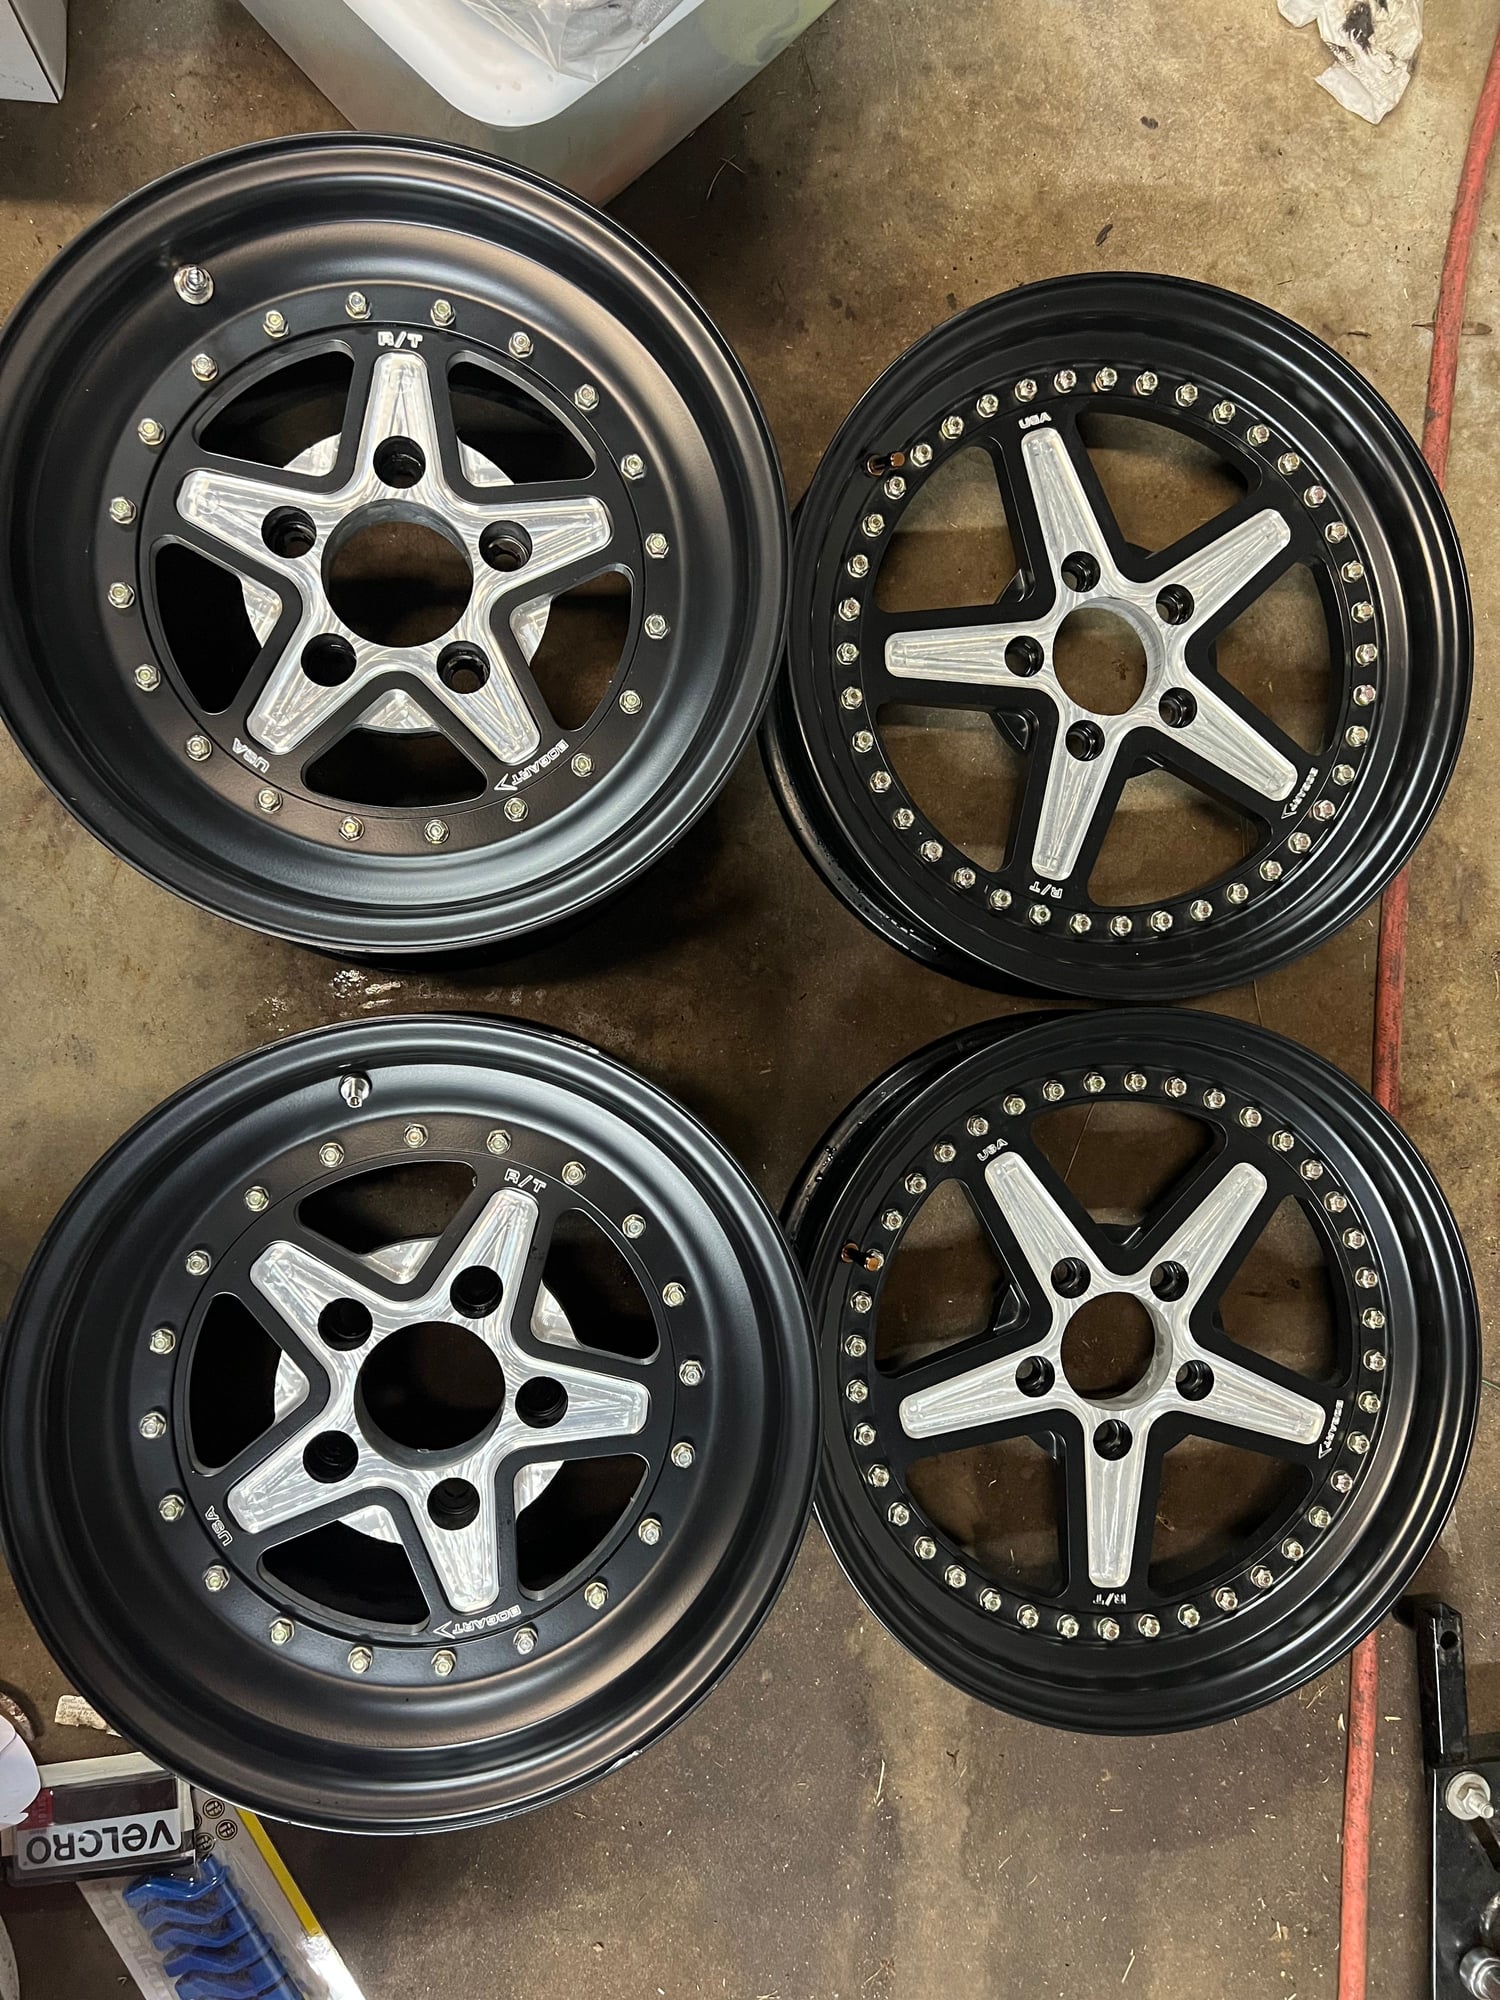 Wheels and Tires/Axles - Bogart bolted r/t’s - Used - 1998 to 2002 Chevrolet Camaro - Moultrie, GA 31768, United States